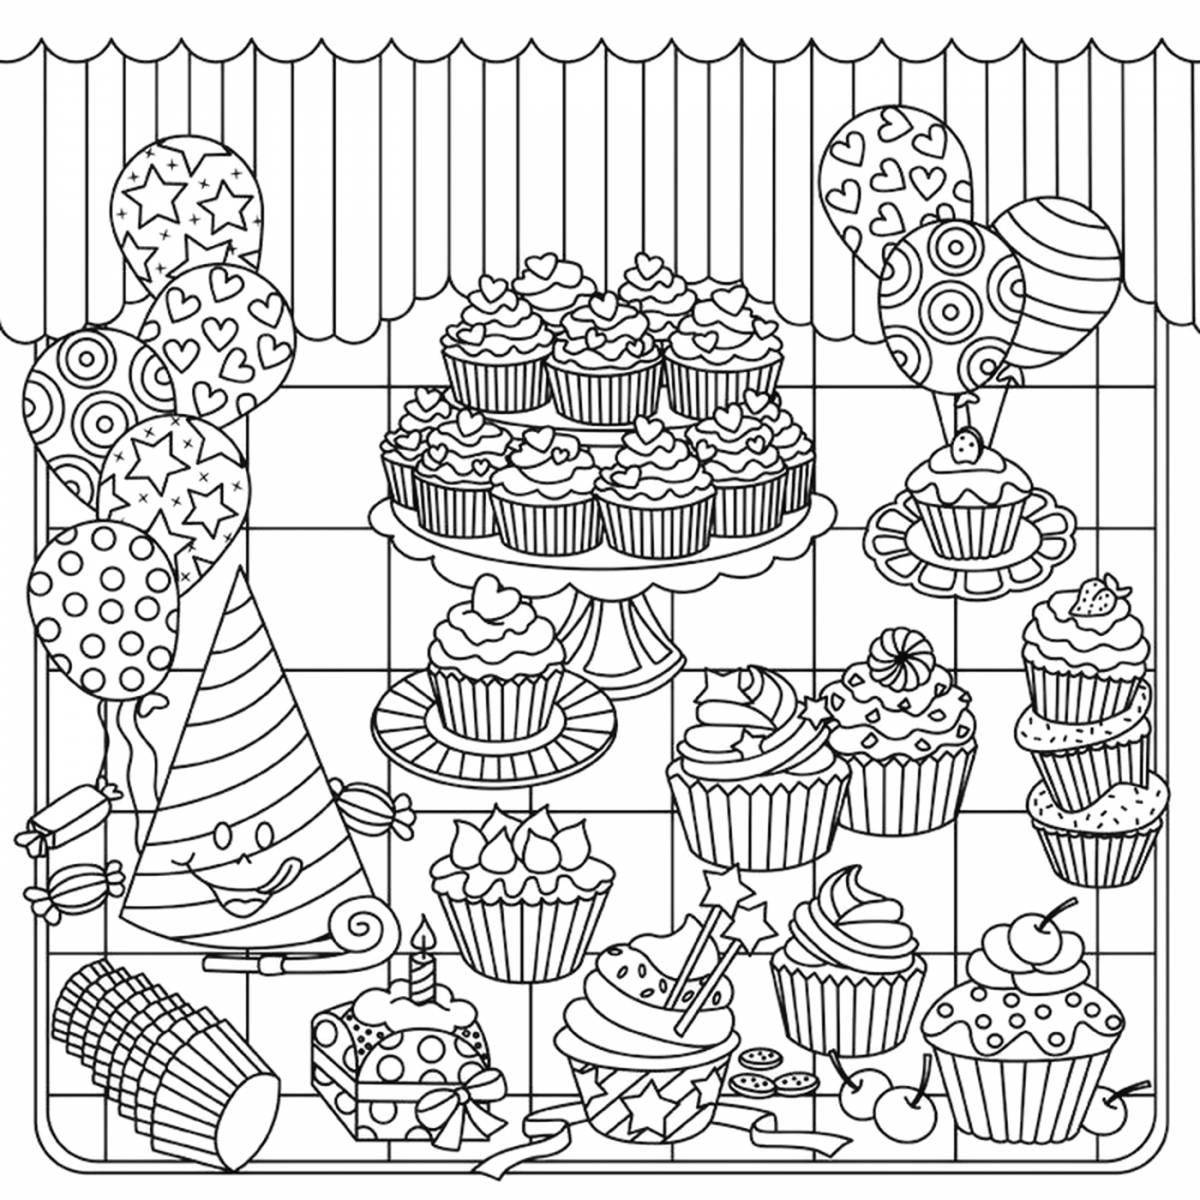 Coloring page gorgeous sweets